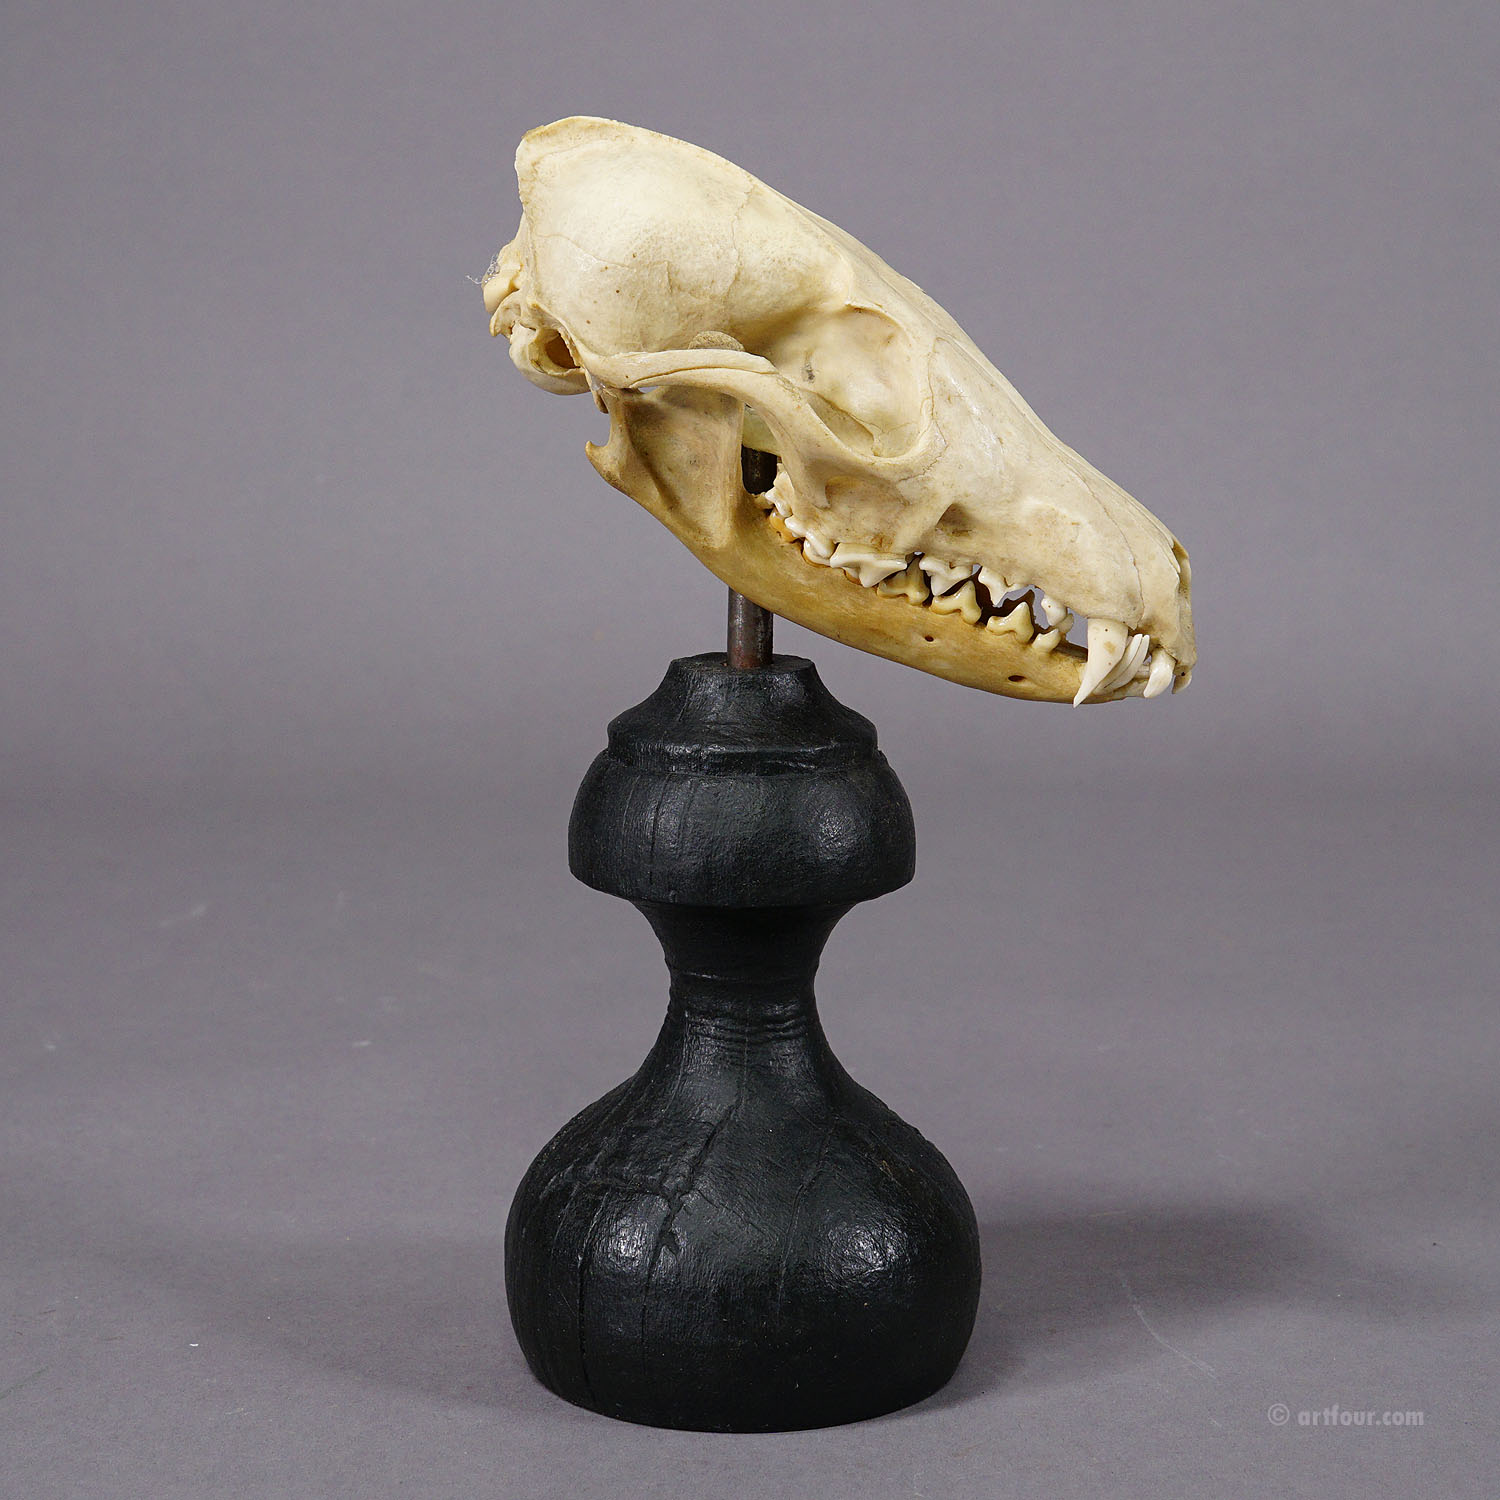 Antique Real Skull of a Fox, Germany ca. 1900s